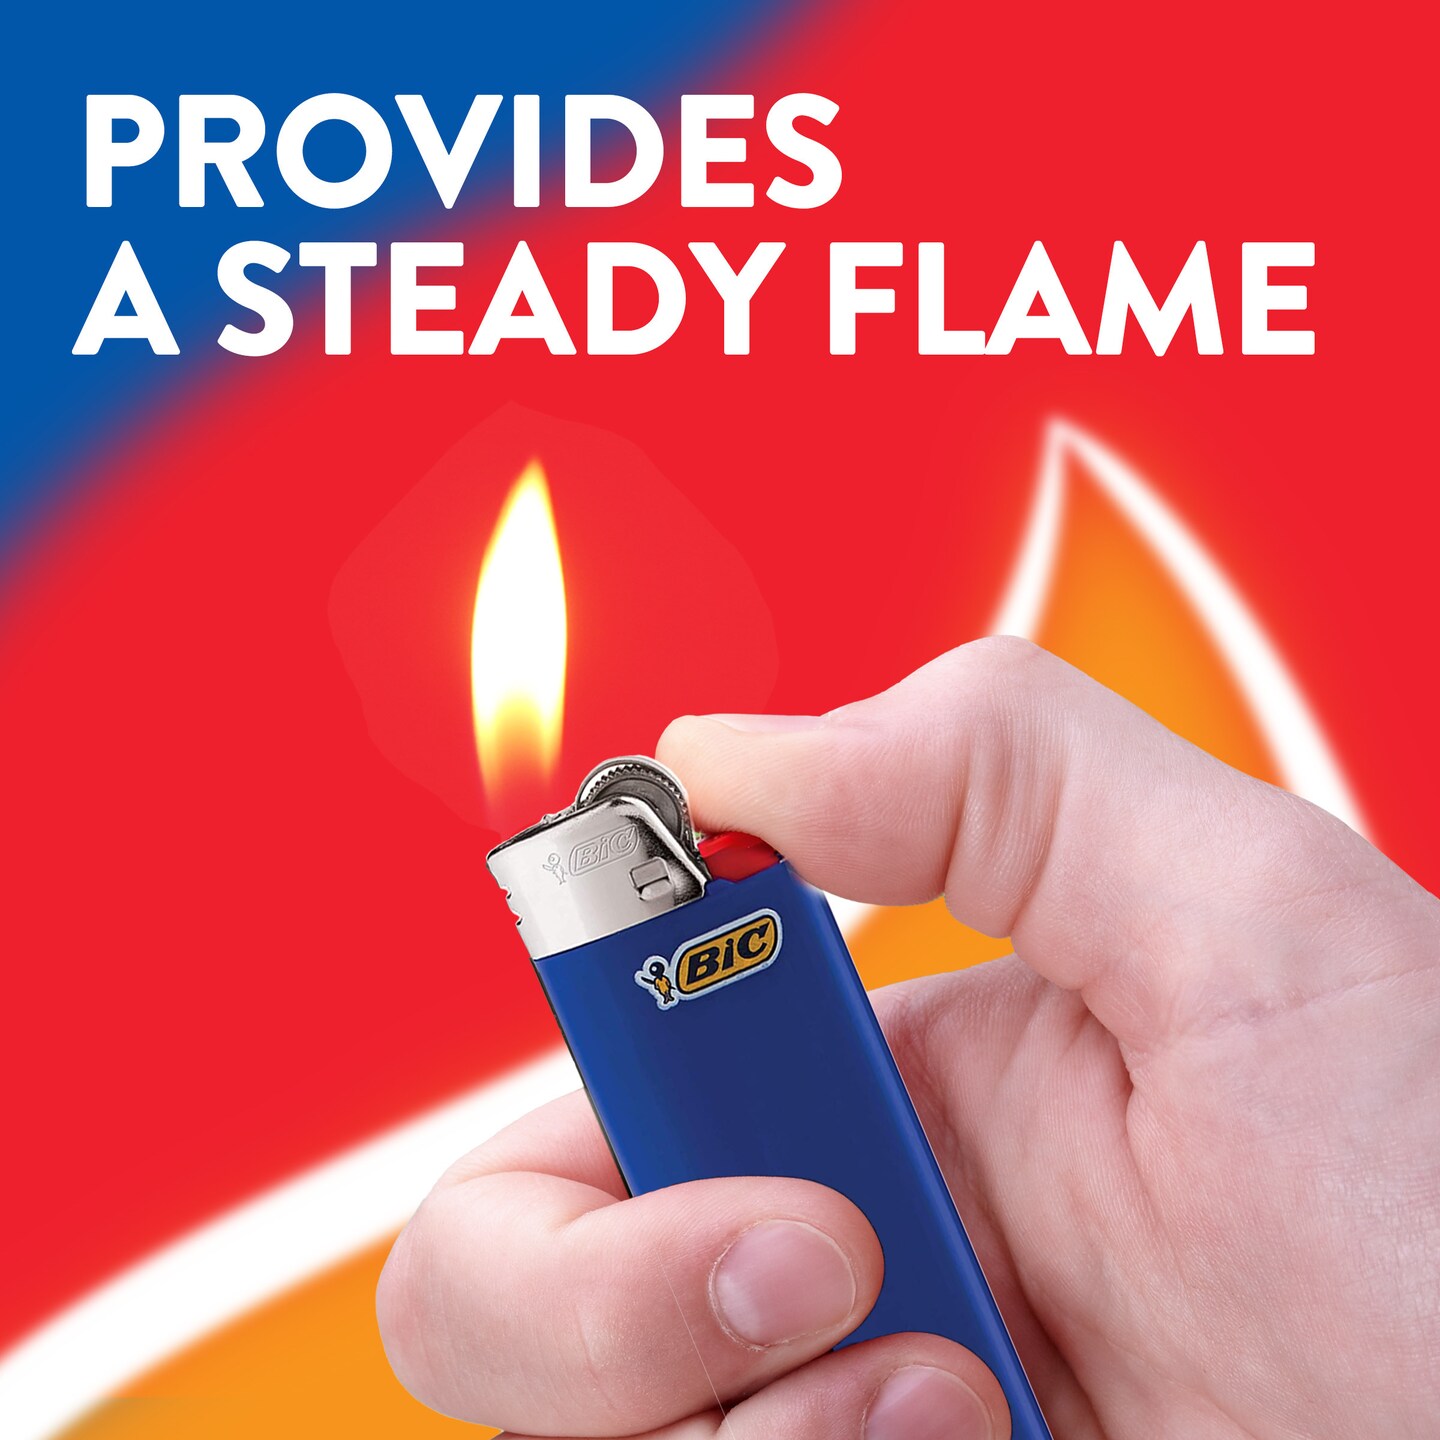 BIC Special Edition Blown Glass Series Maxi Pocket Lighters, Set of 8 Lighters